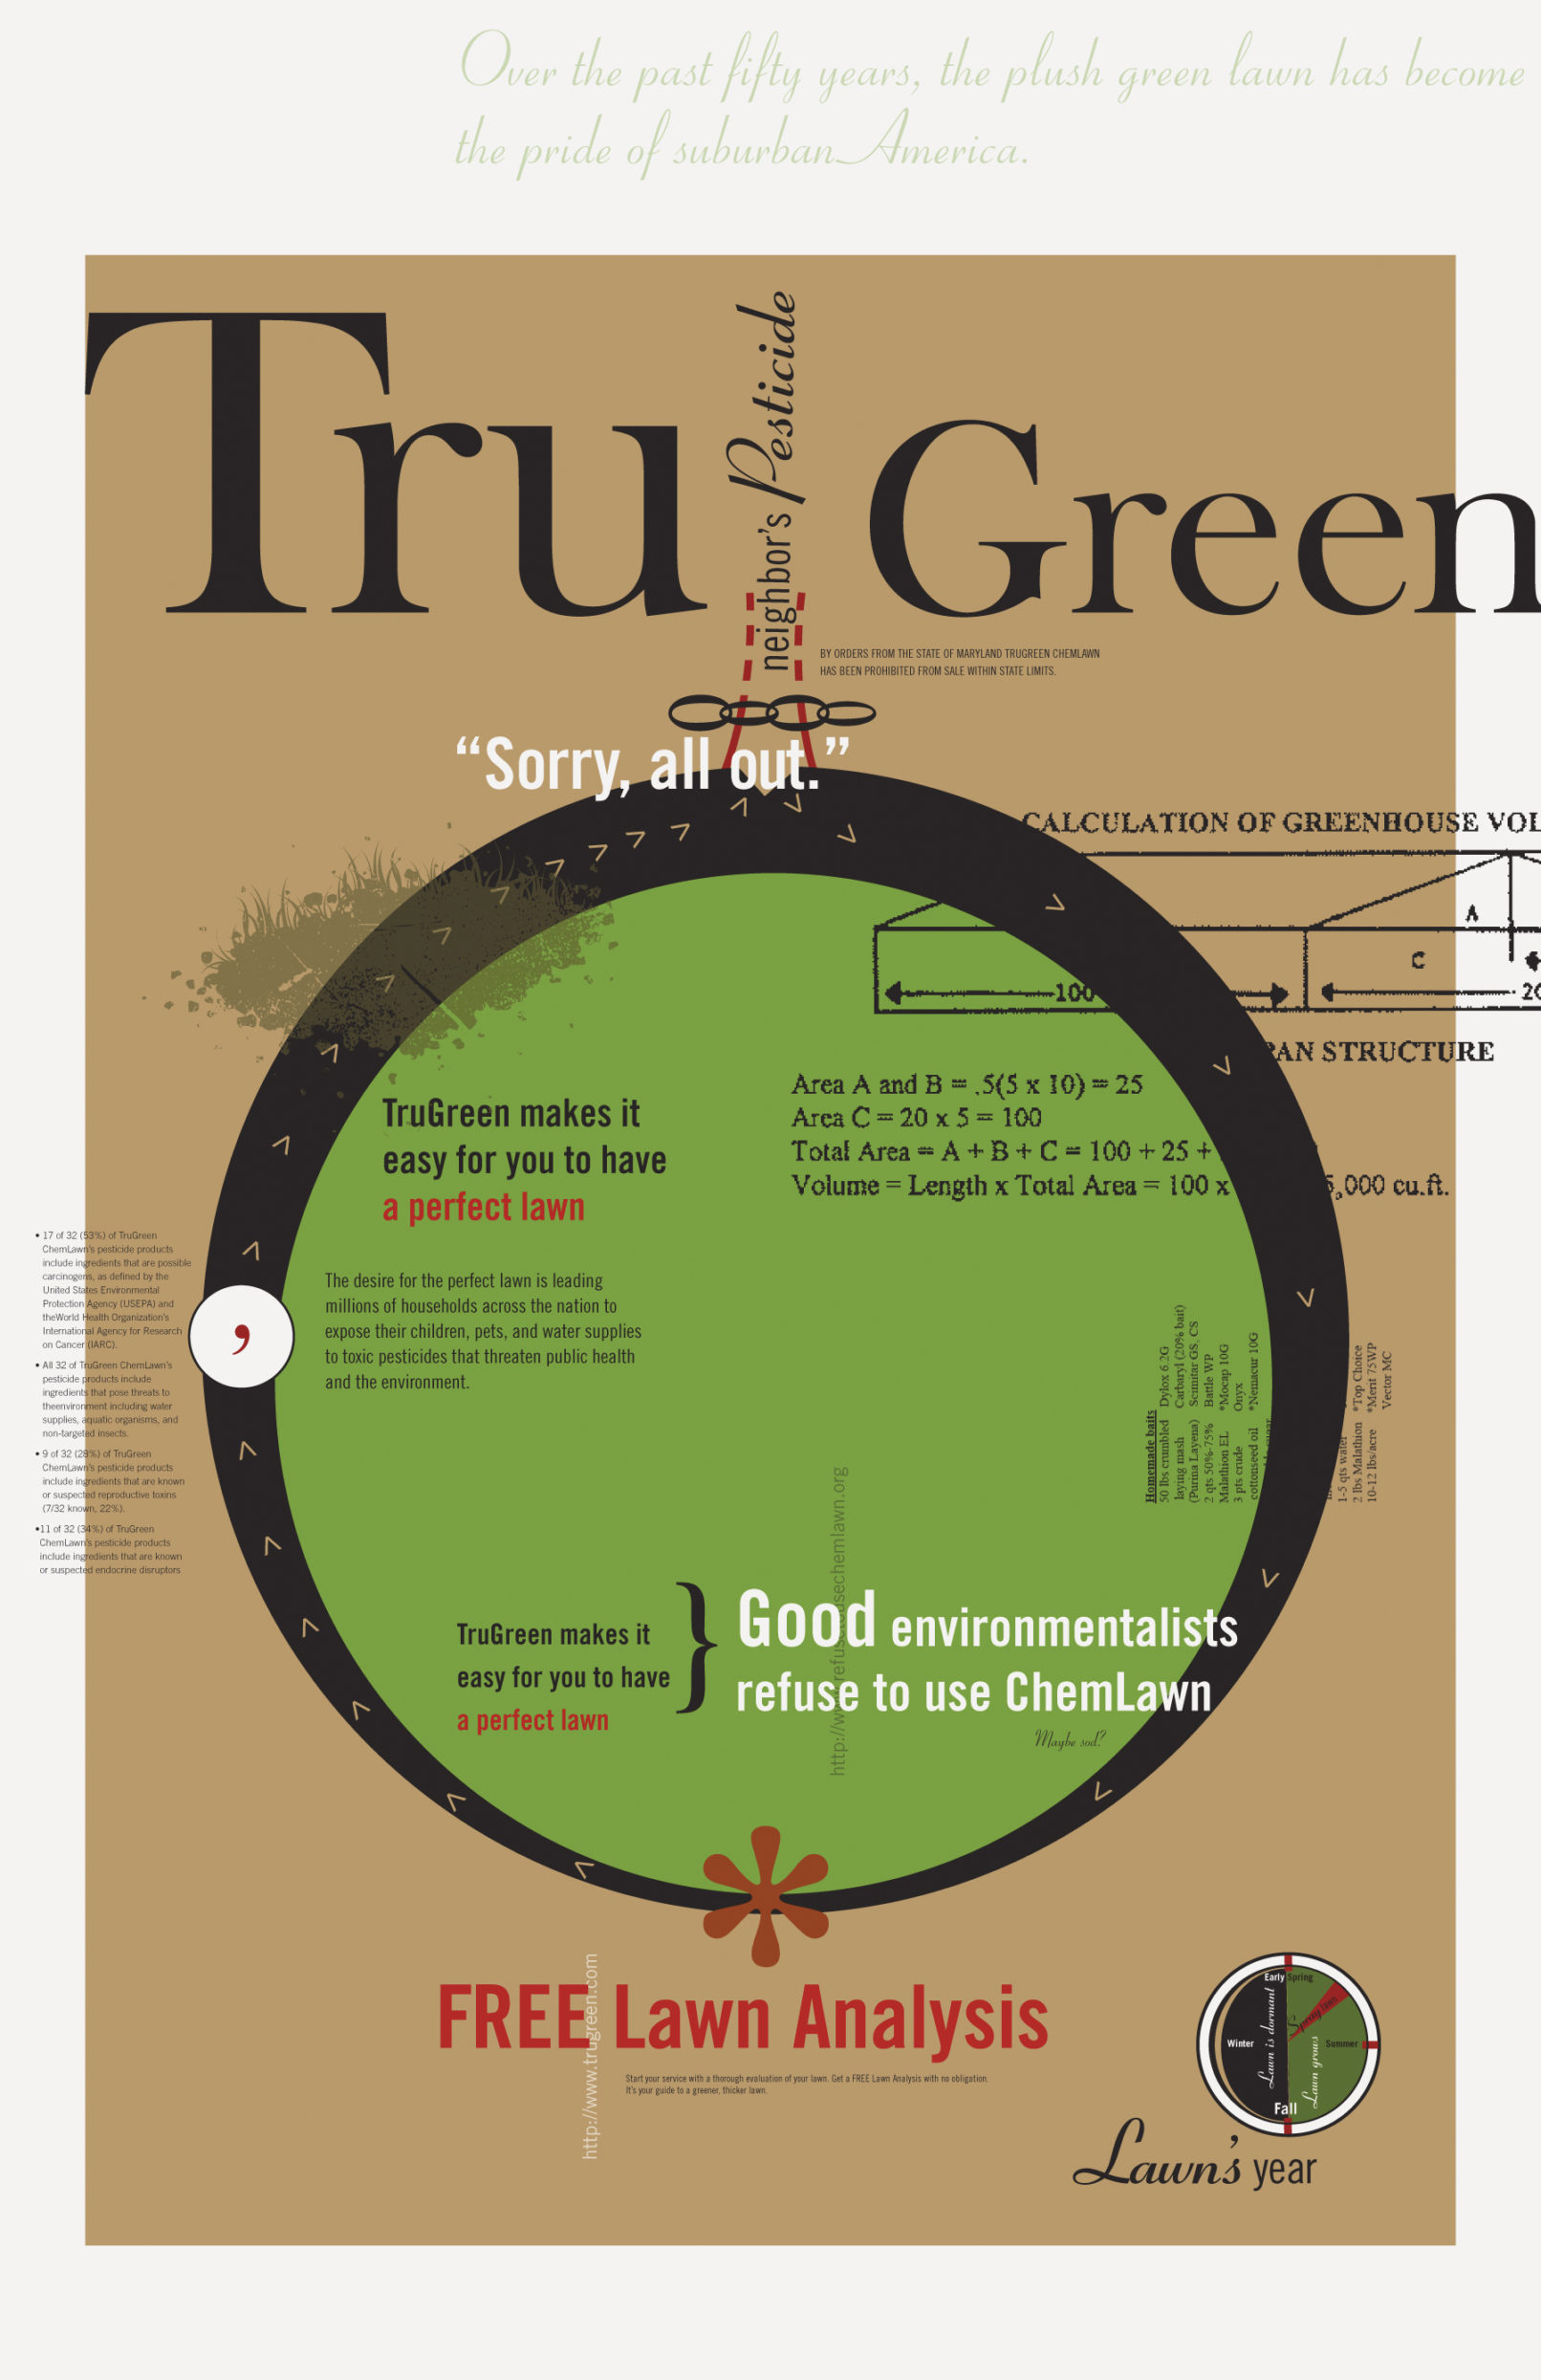 Tan poster with large green dot in the center. Tru Green is written in large text. Smaller text gives details of Tru Green grass treatment. Radial design